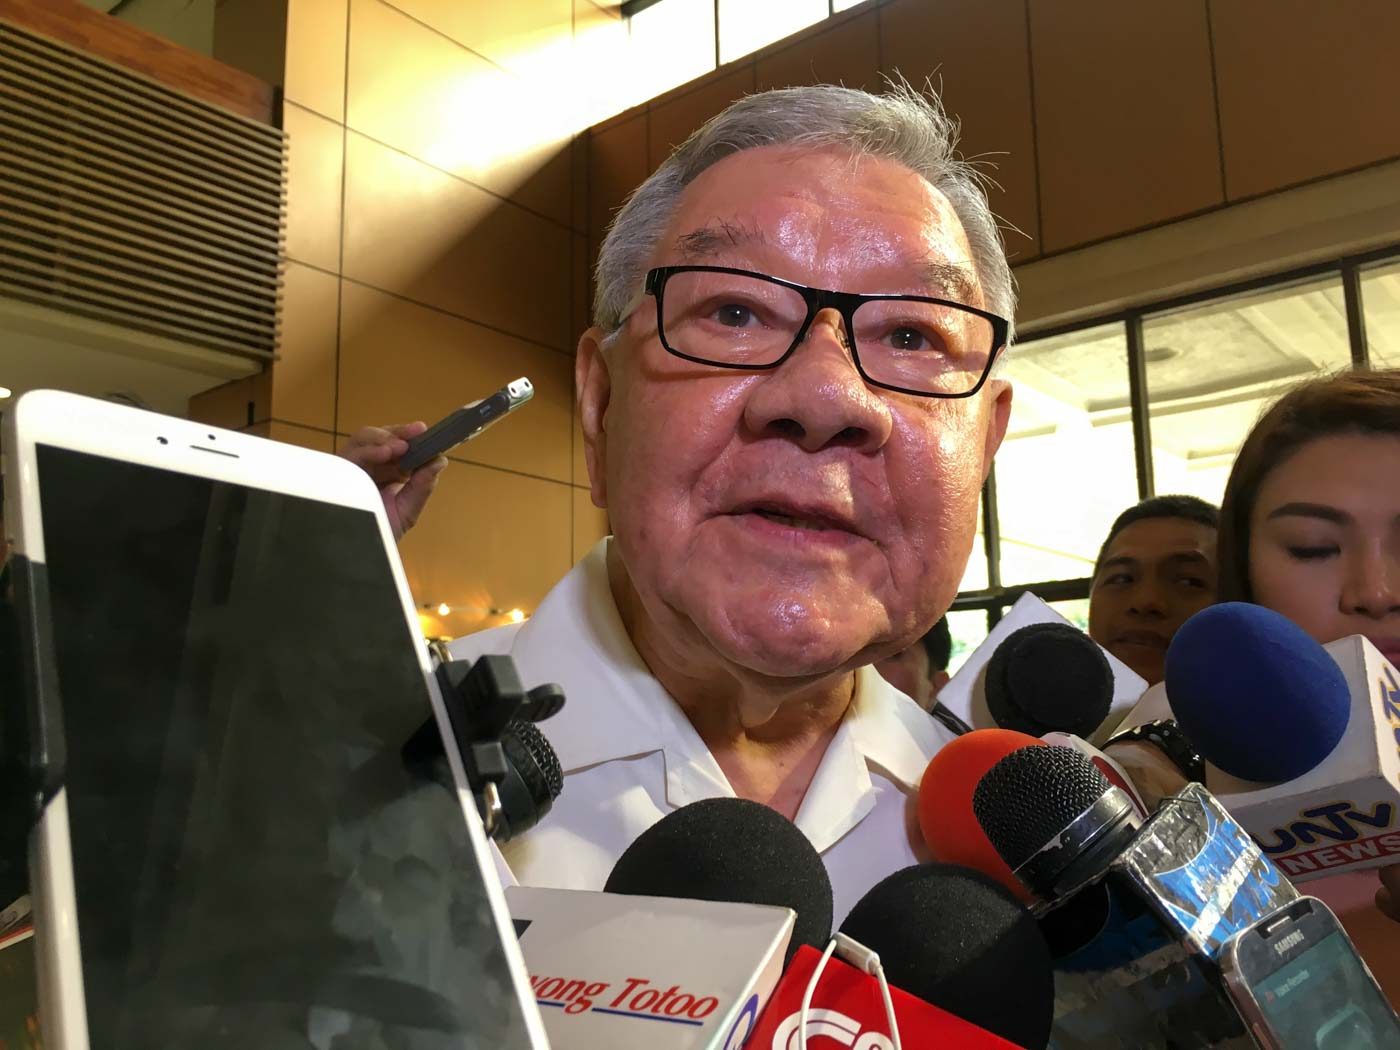 Sonny Belmonte will stick with LP, says daughter Joy